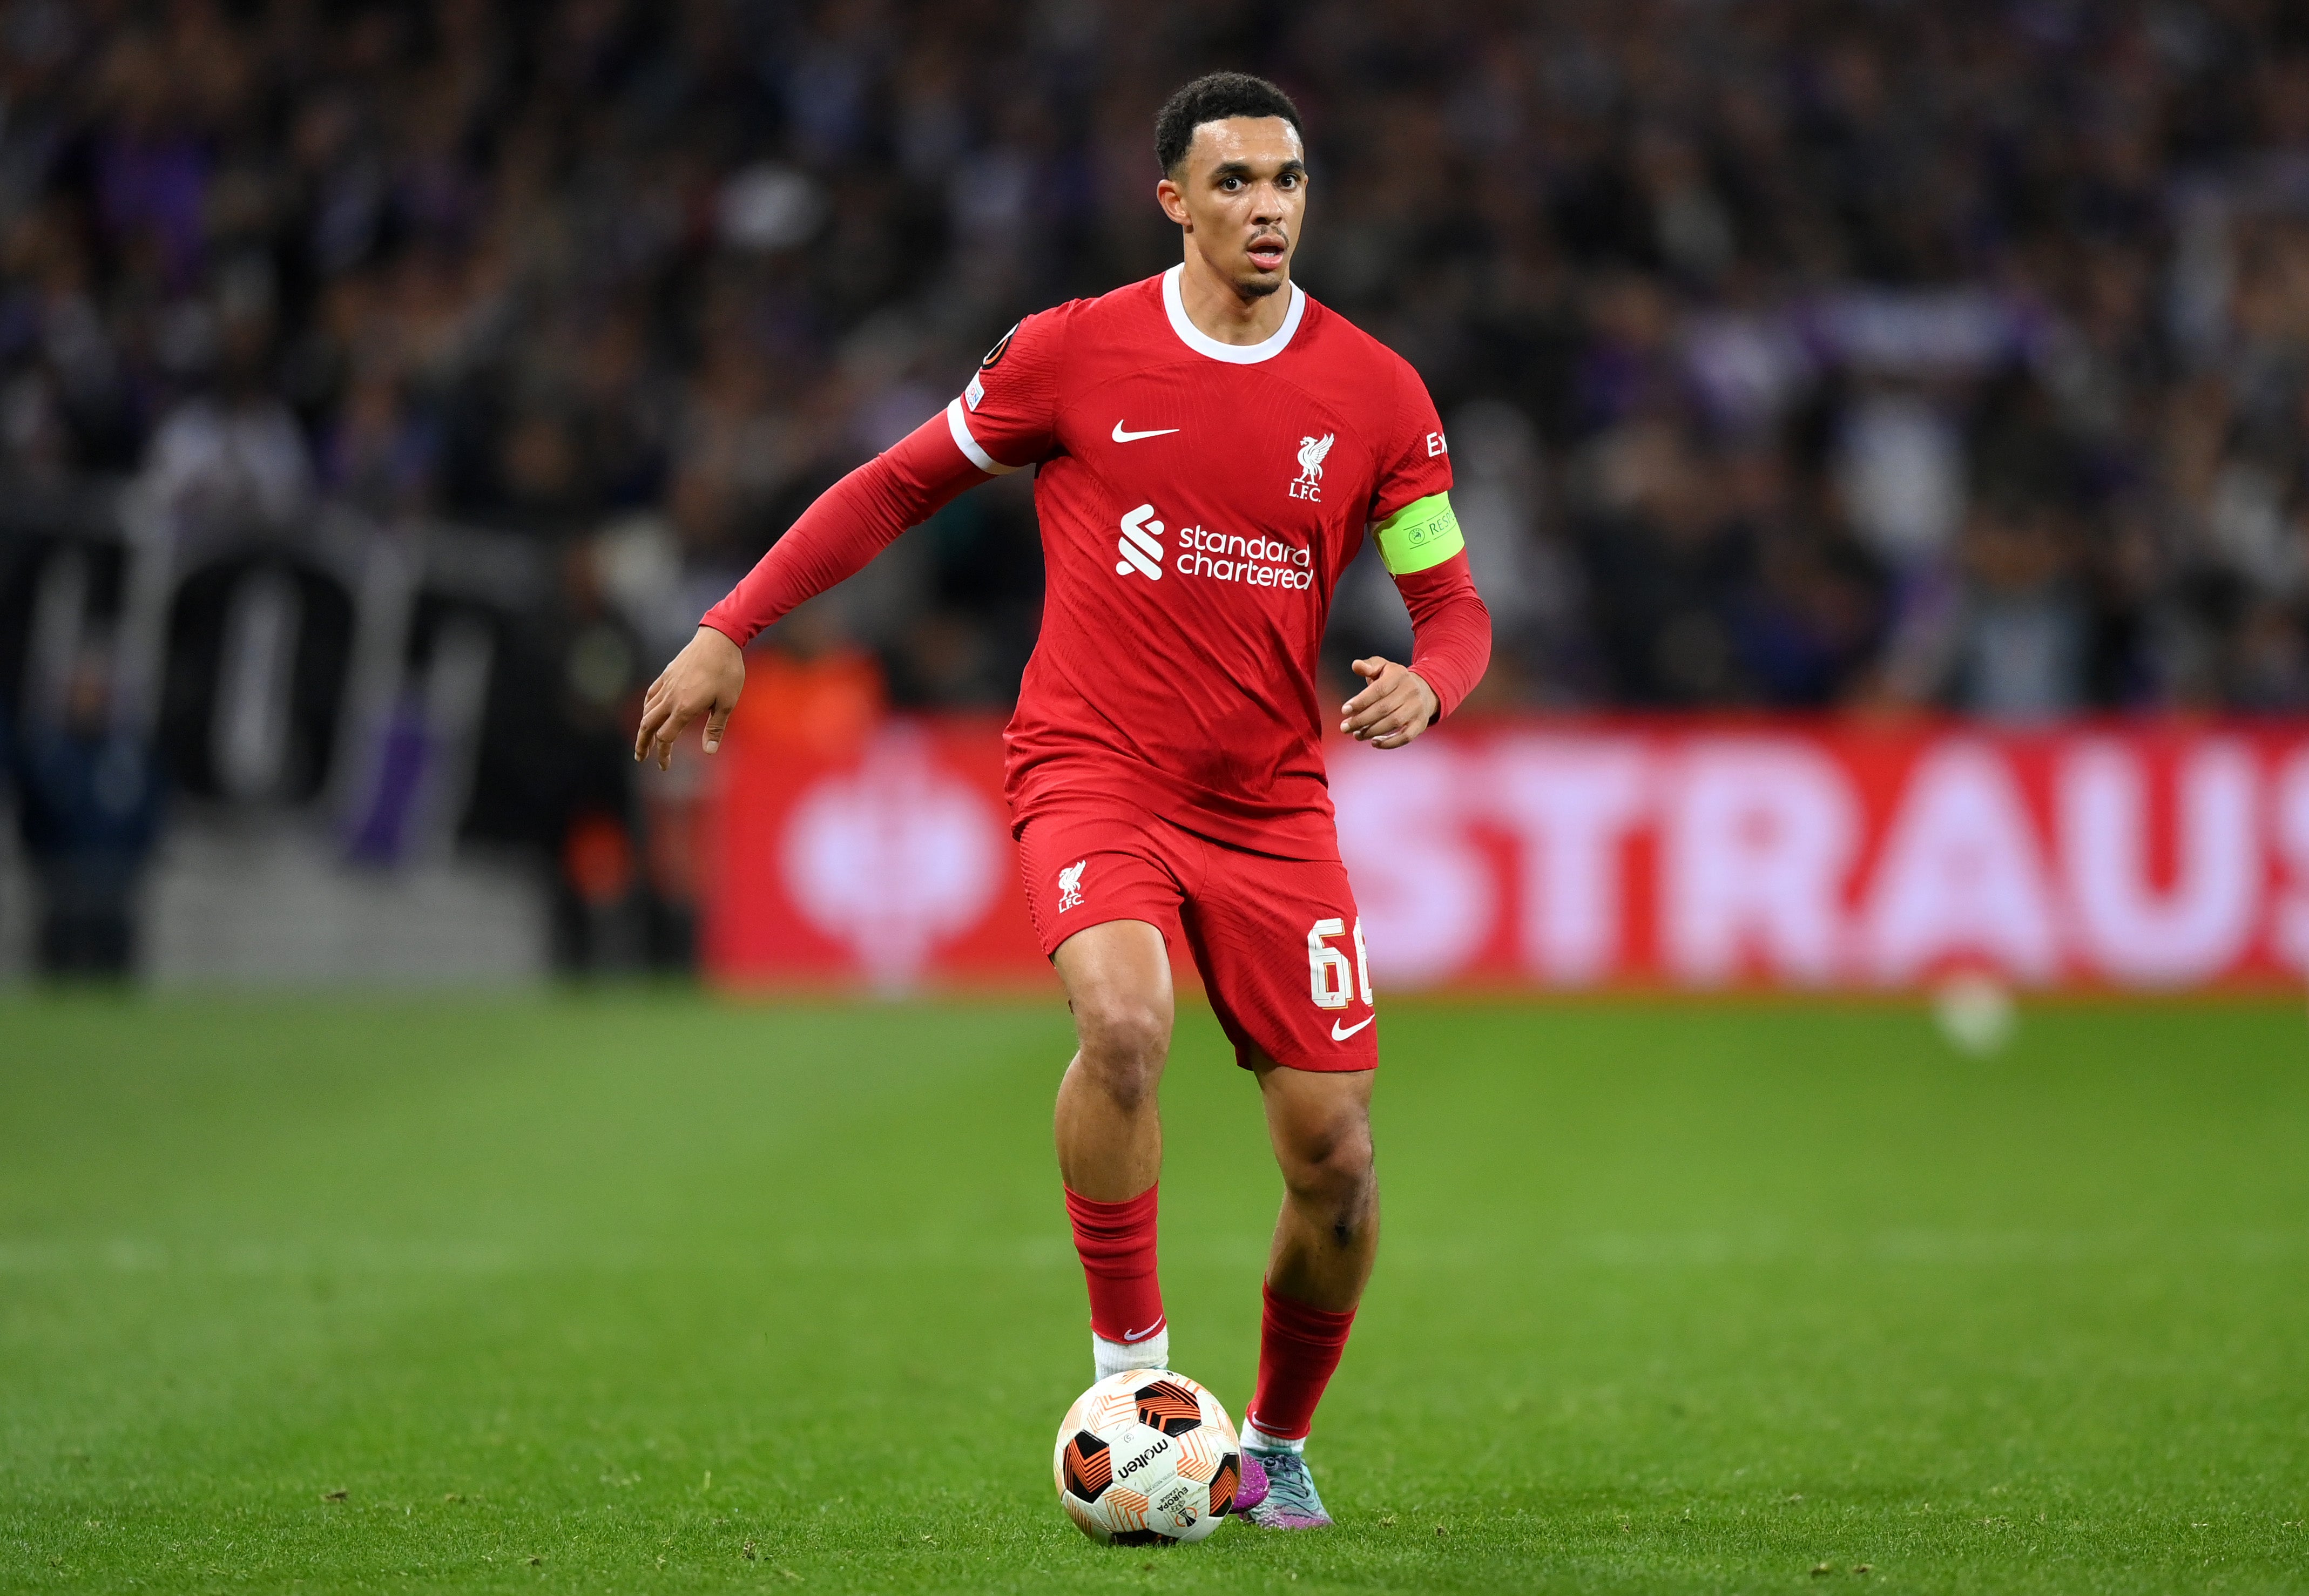 Trent Alexander-Arnold is Liverpool’s vice-captain this season